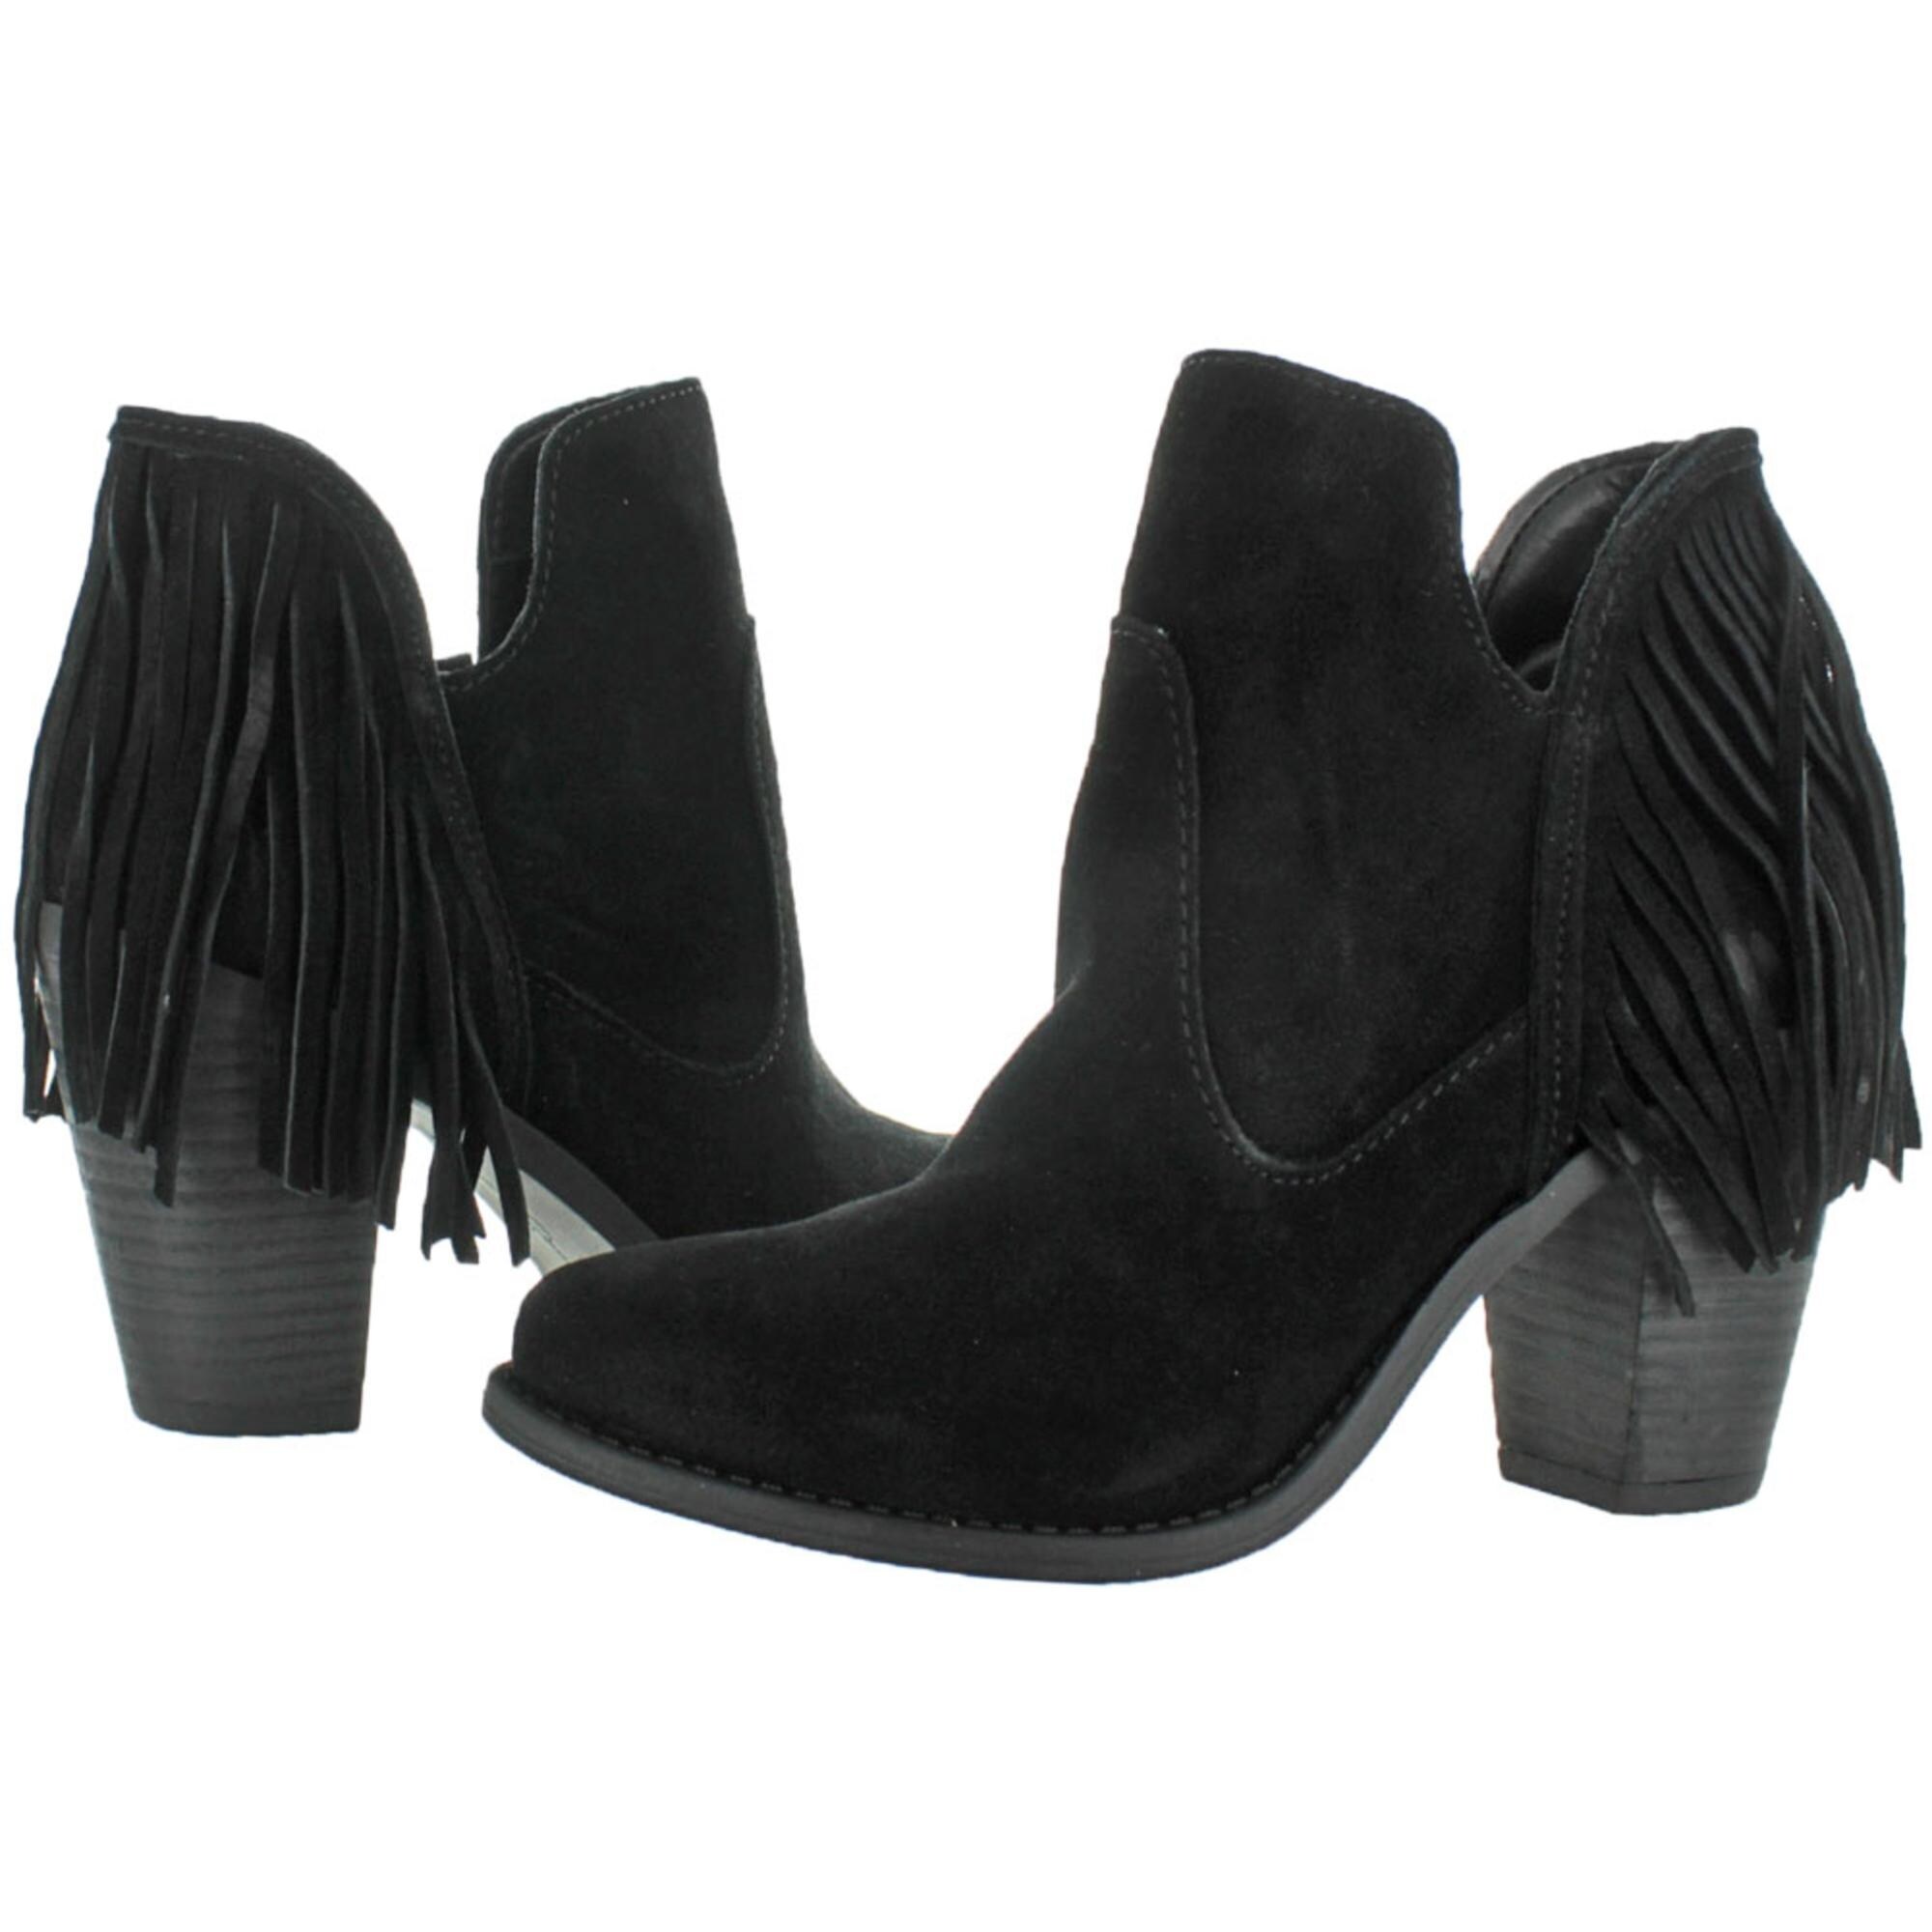 Cecila Suede Ankle Booties Fringe 